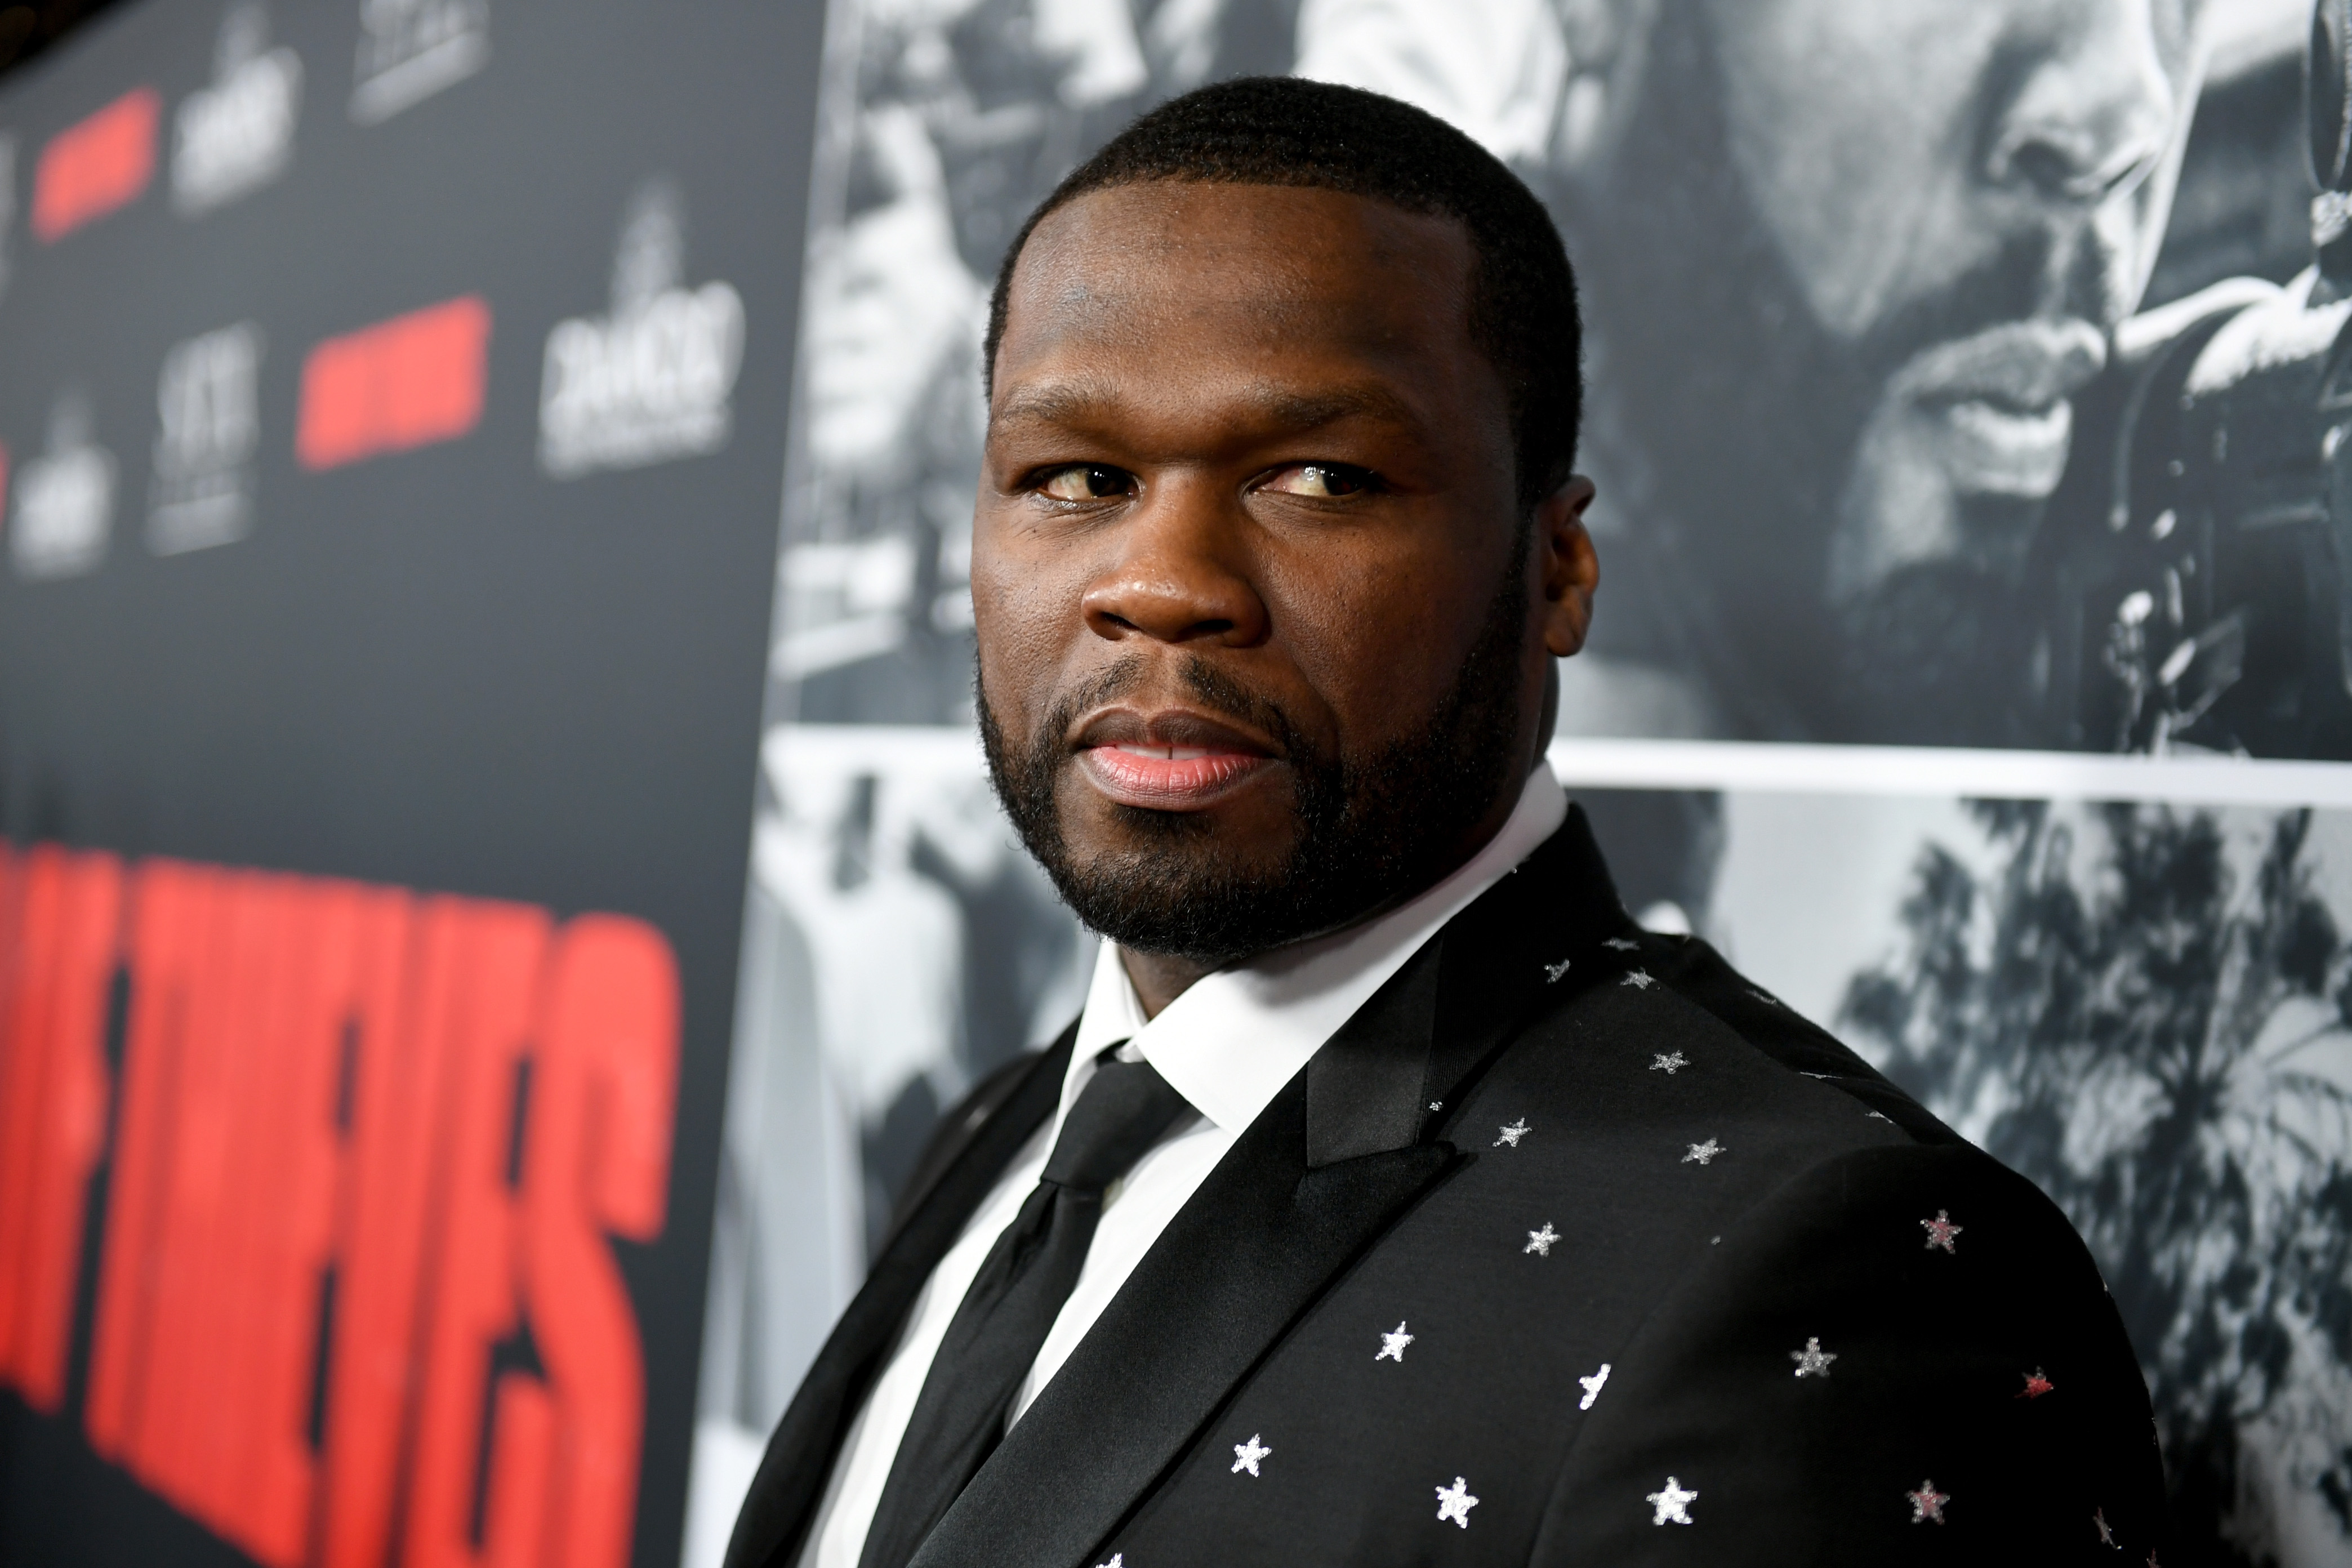 50 Cent at the premiere of STX Films' "Den of Thieves" on January 17, 2018, in Los Angeles, California. | Source: Getty Images